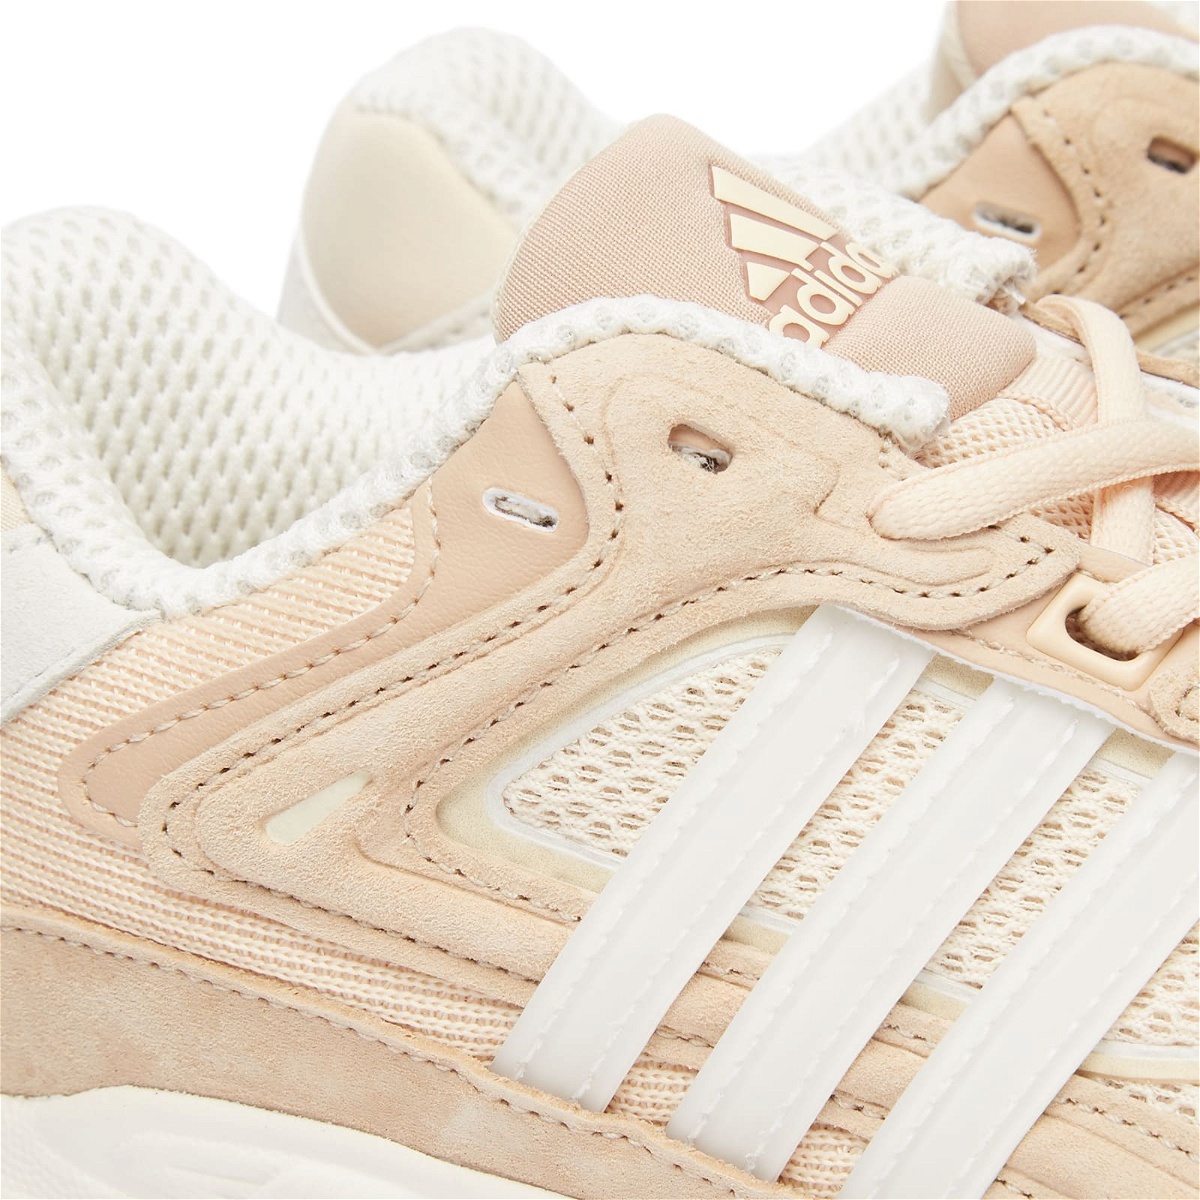 Sand/Off Adidas White/Beige adidas in Sneakers CL Response